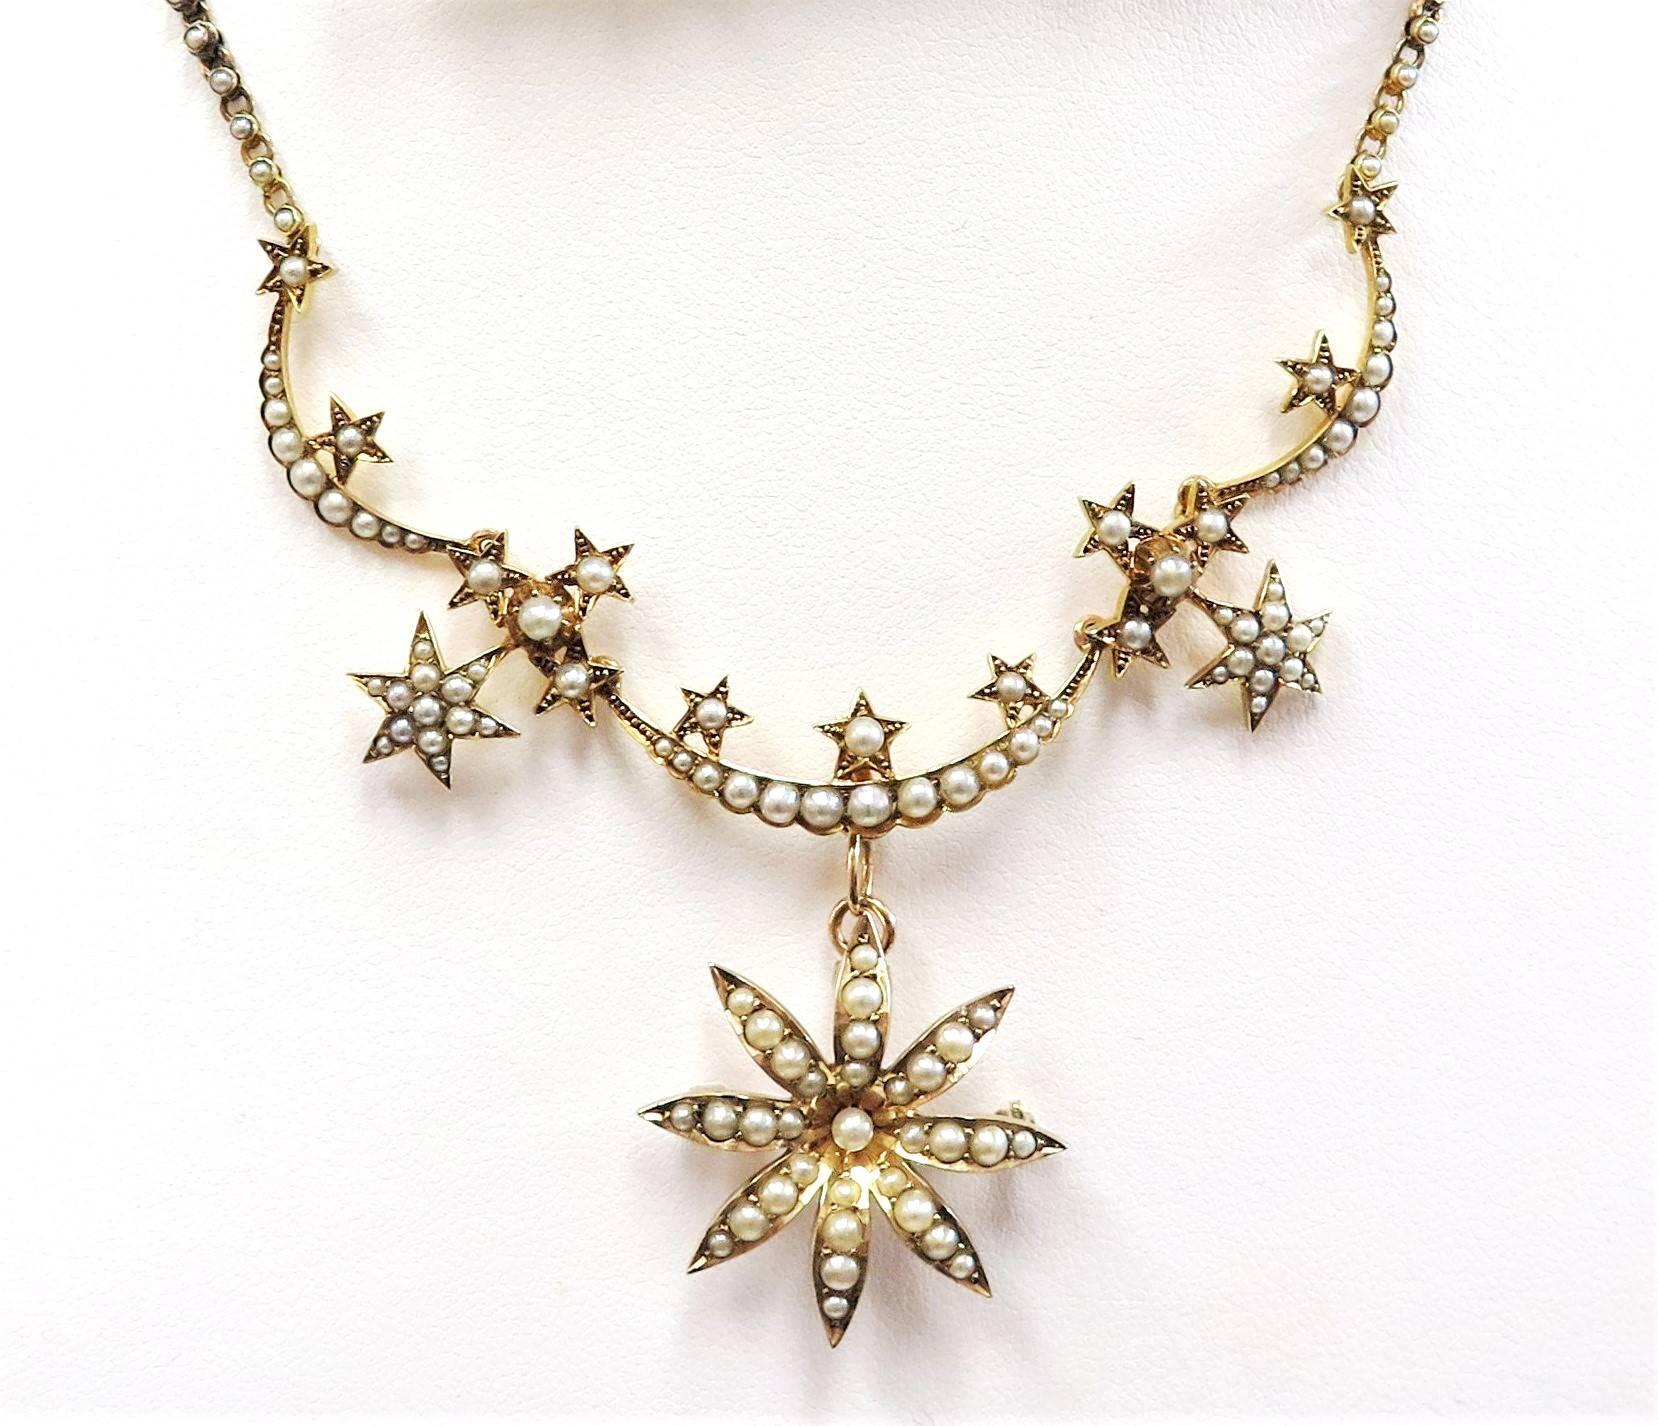 A beautiful and stately necklace in the celebrated Garland Style popular around the turn of the century. The necklace is characteristic of Edwardian fashion, combining luxury with a light, delicate design. The necklace is worked in 15ct gold and set